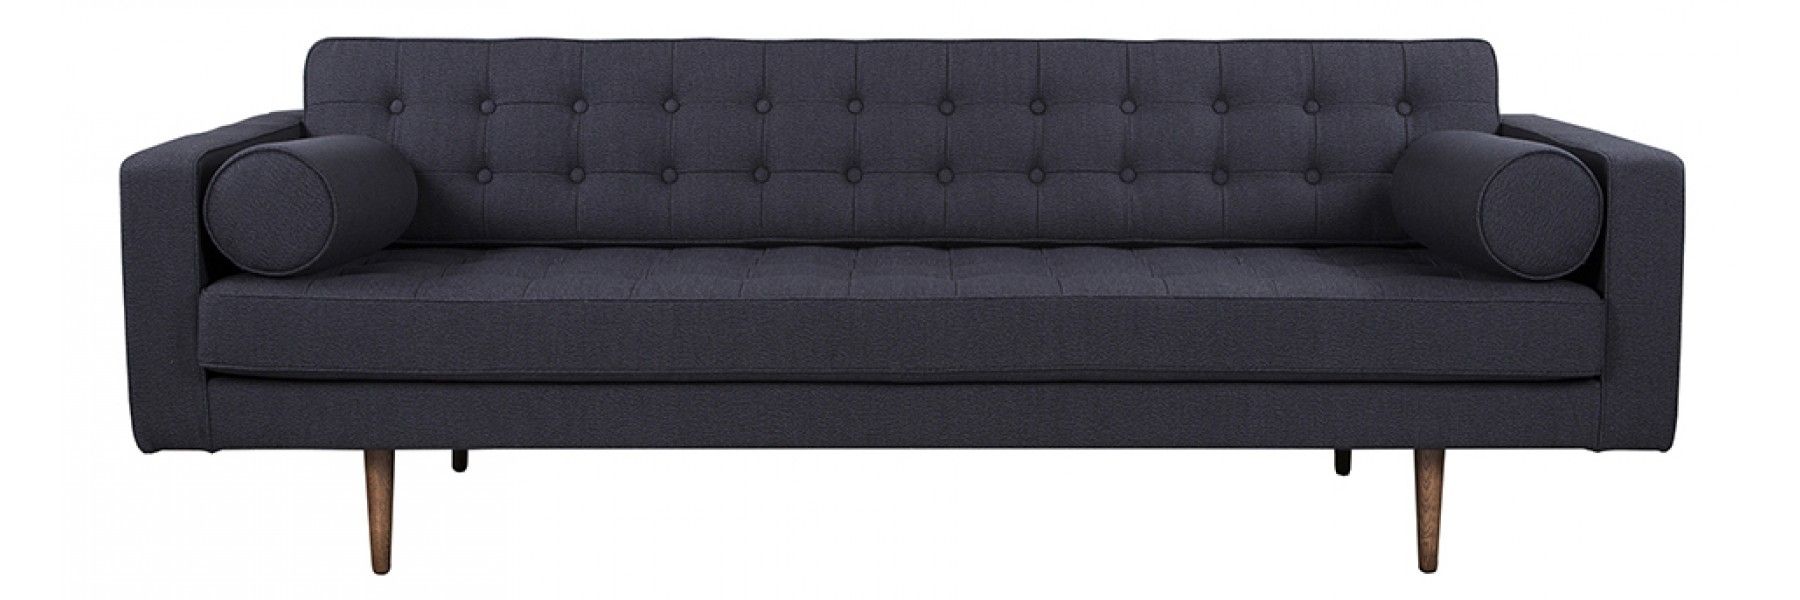 Capetown Sofa Charcoal Inside Nico Grey Sectionals With Left Facing Storage Chaise (View 27 of 30)